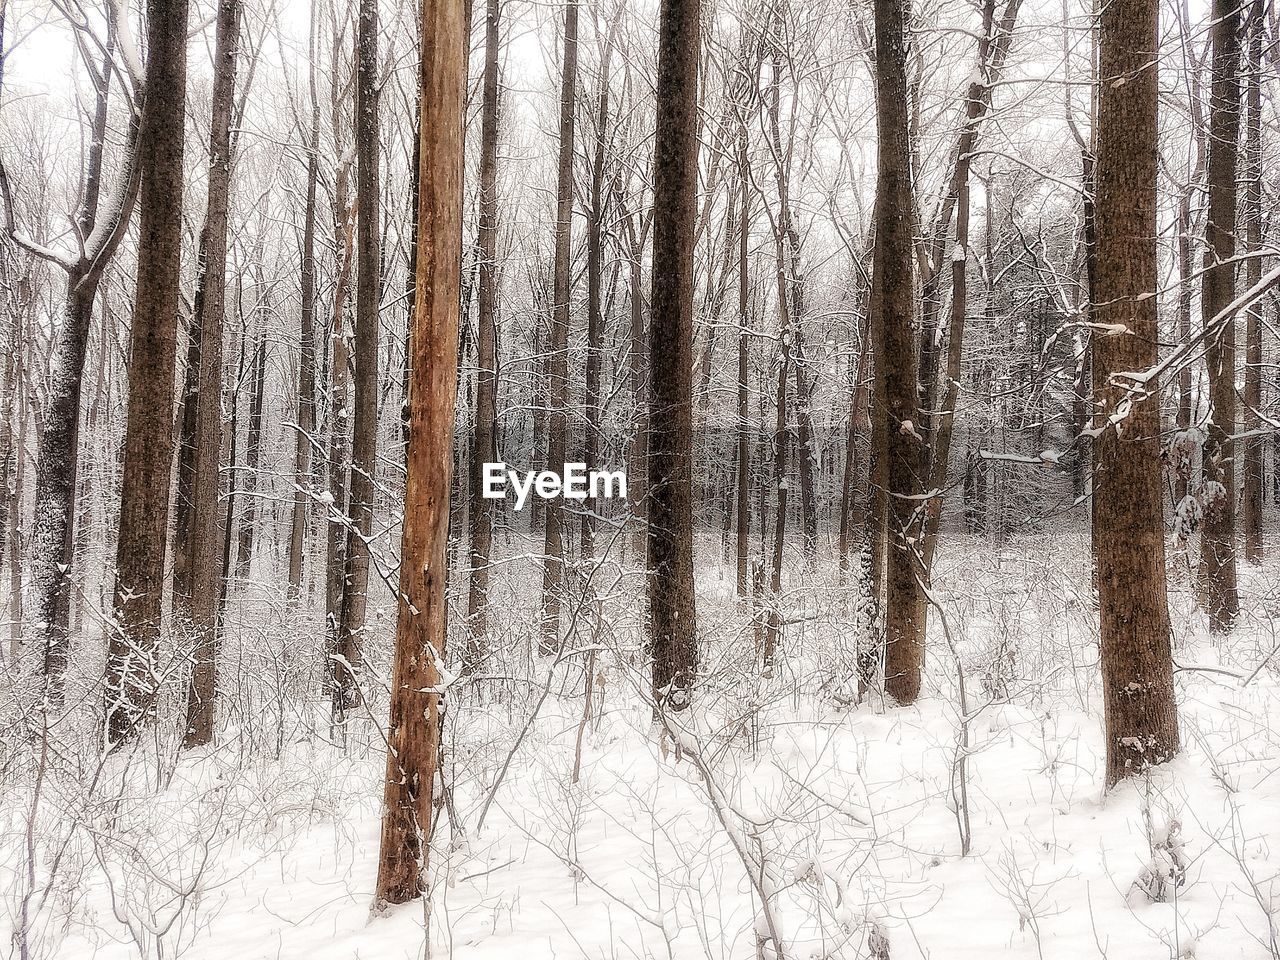 FROZEN TREES IN FOREST